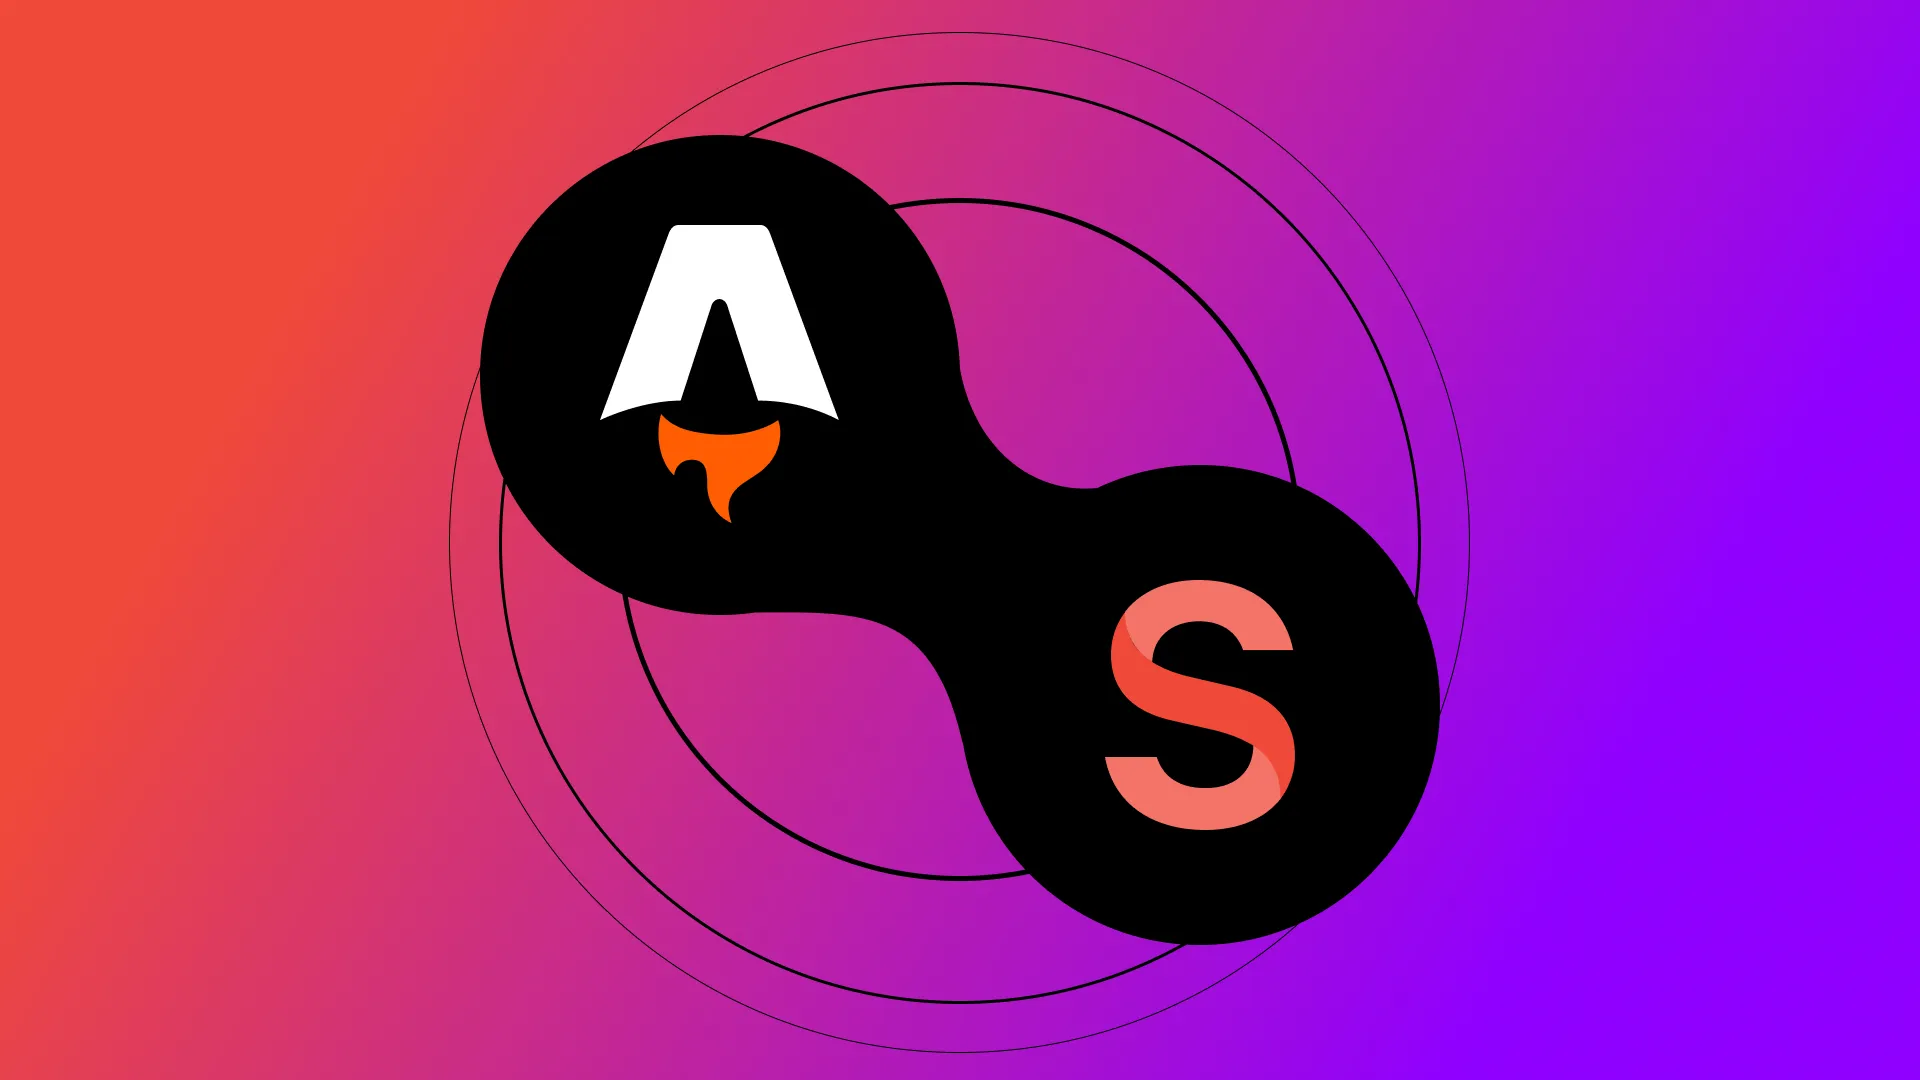 Astro and Sanity's logos connected by a diagonal line